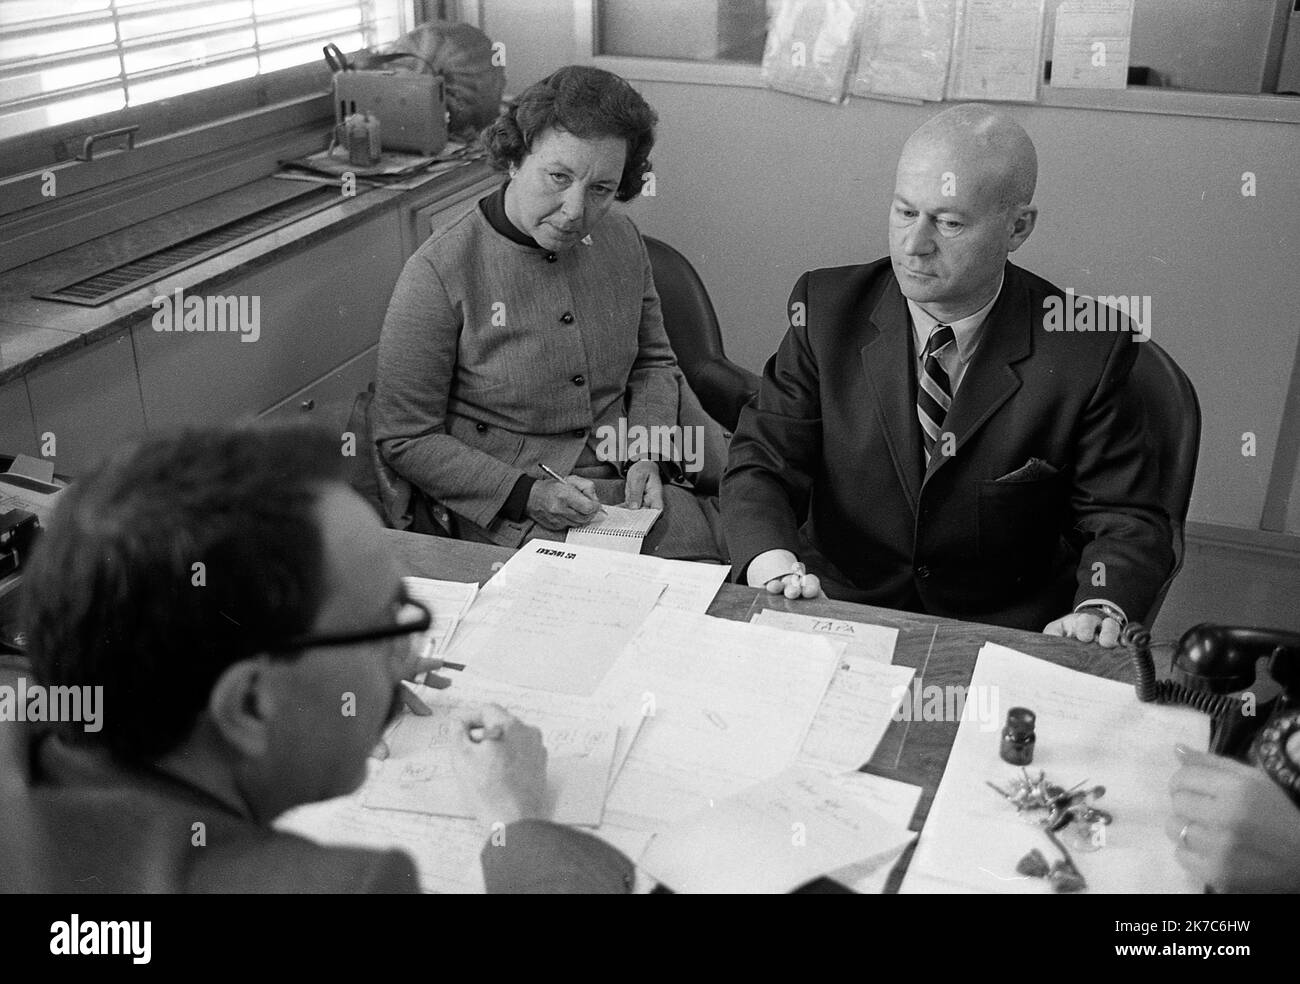 Arthur Rothstein, American photographer, Grace Goodman, his wife, and Francisco Vera (left), during his visit to Editorial Abril, Buenos Aires, 1969 Stock Photo